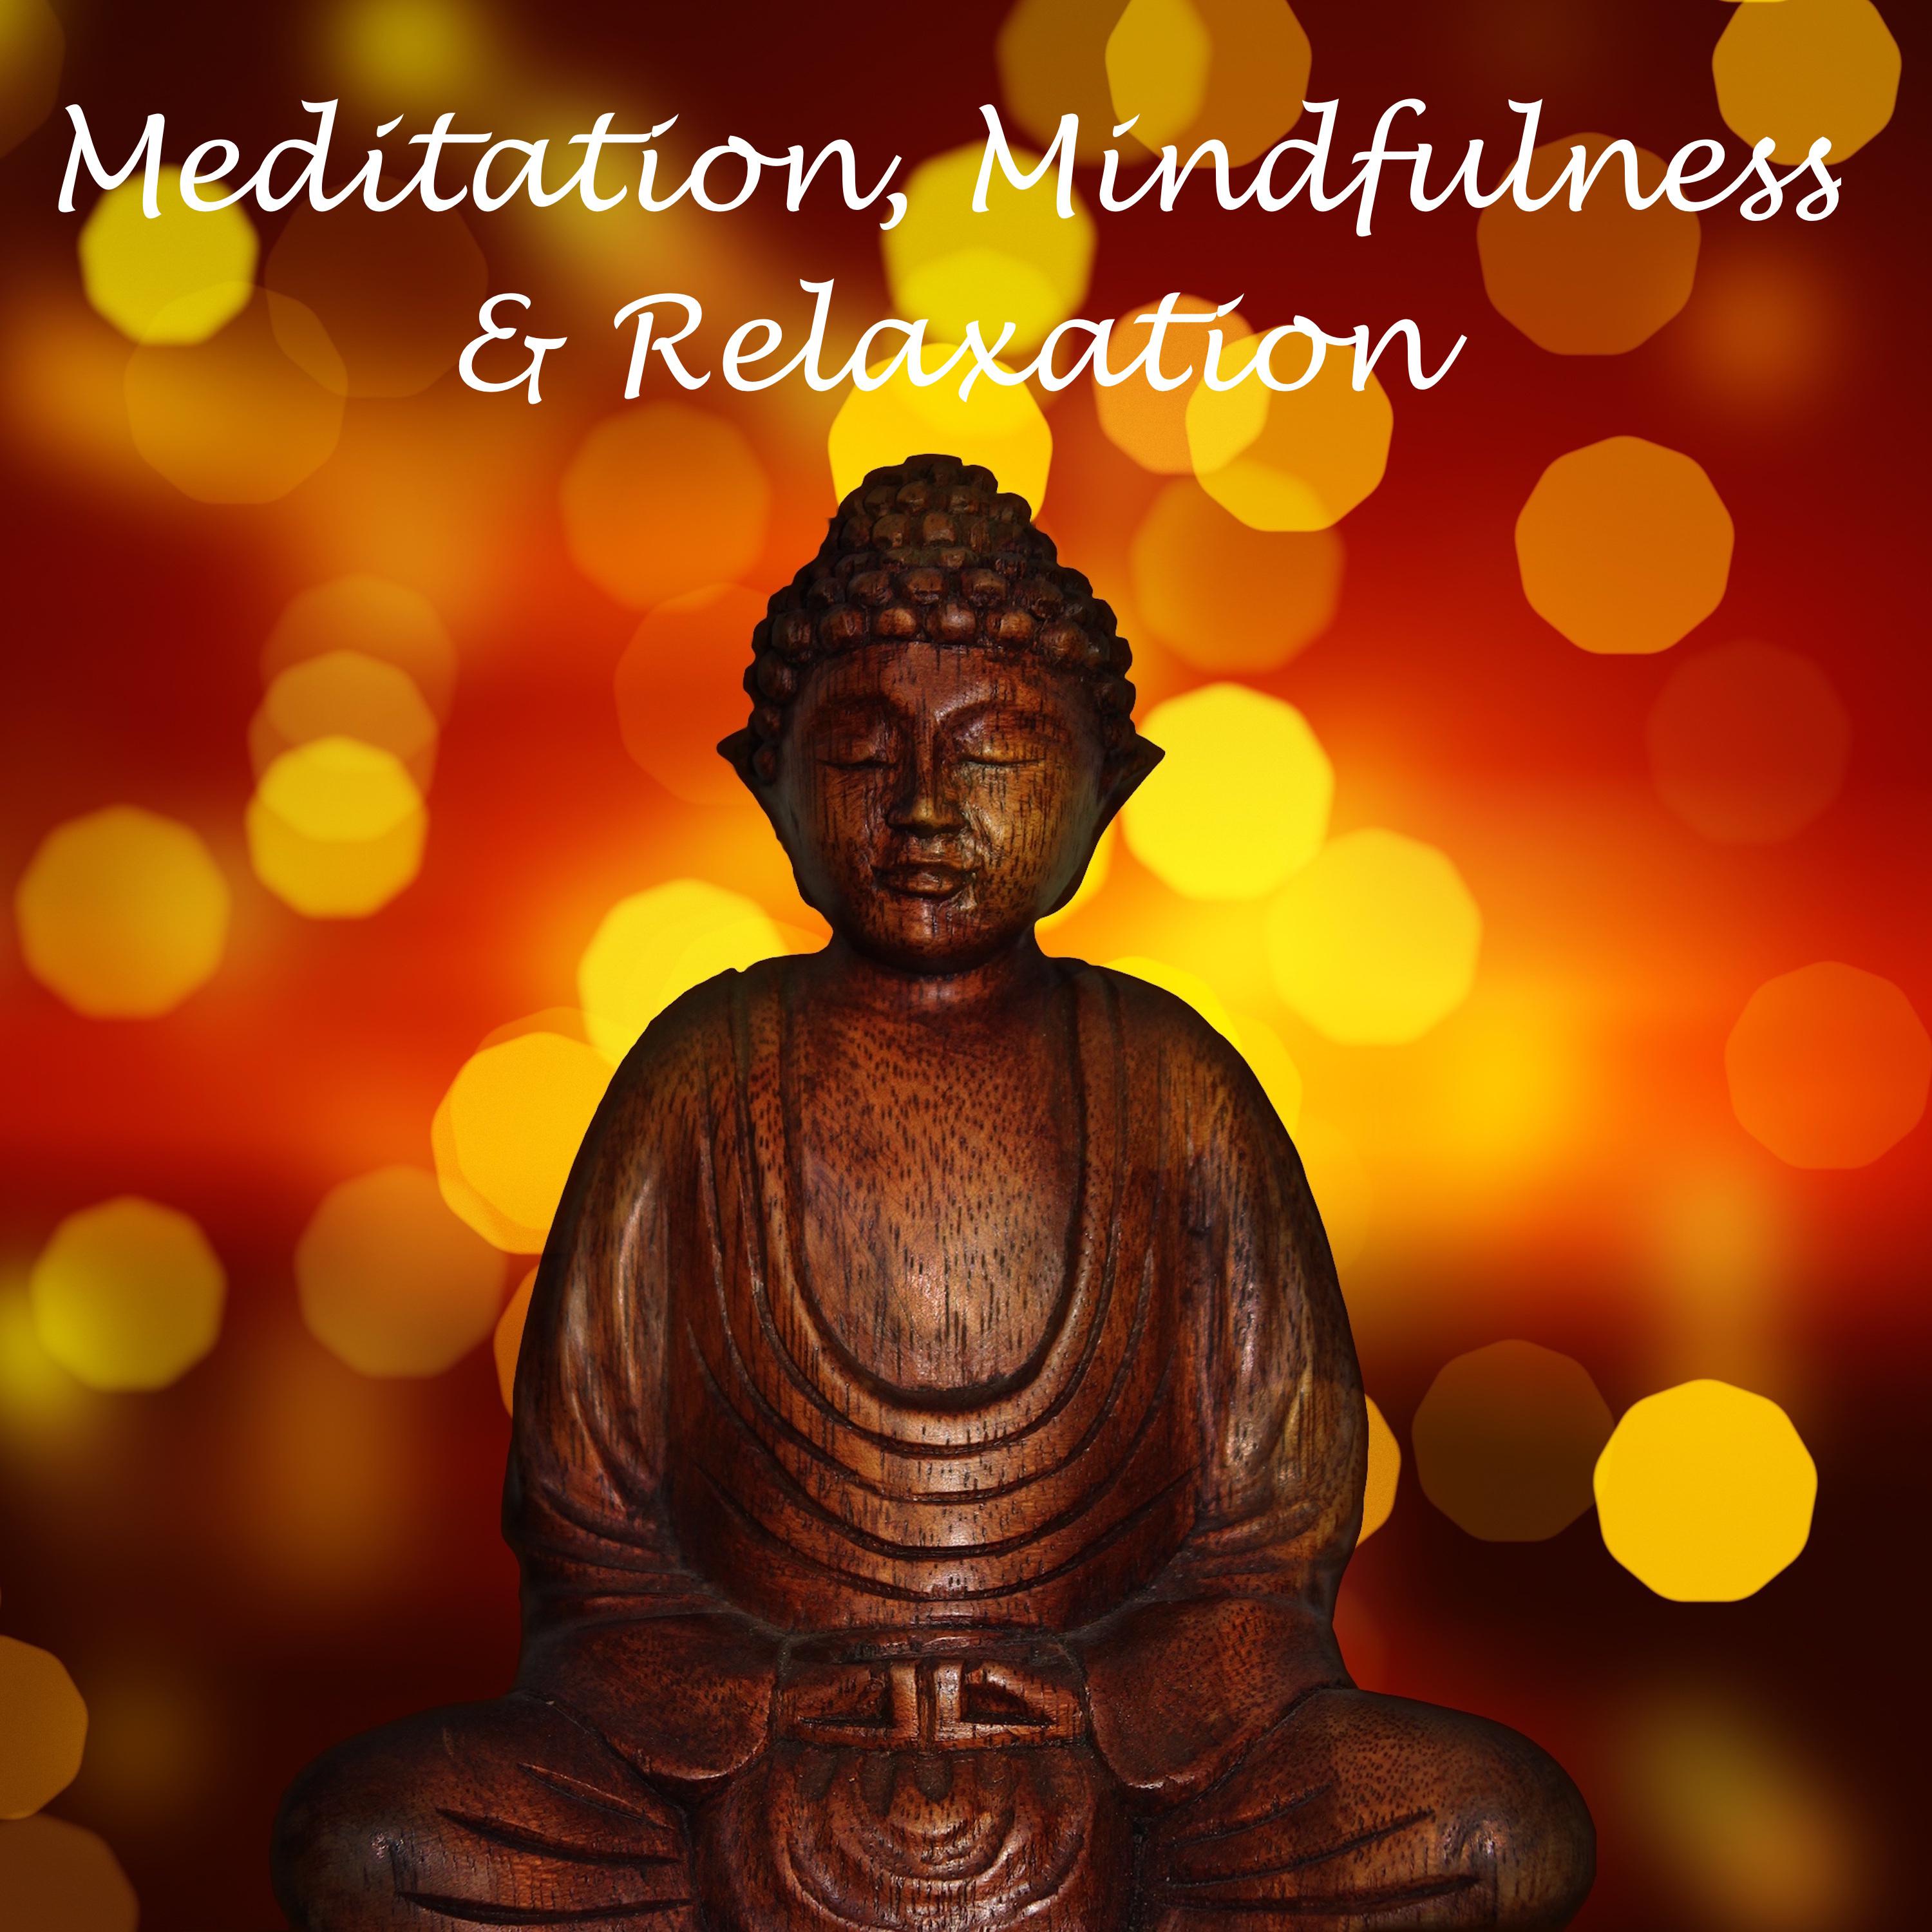 8 Meditation Rain Sounds: The Perfect Soundtrack to Meditation and Relaxation